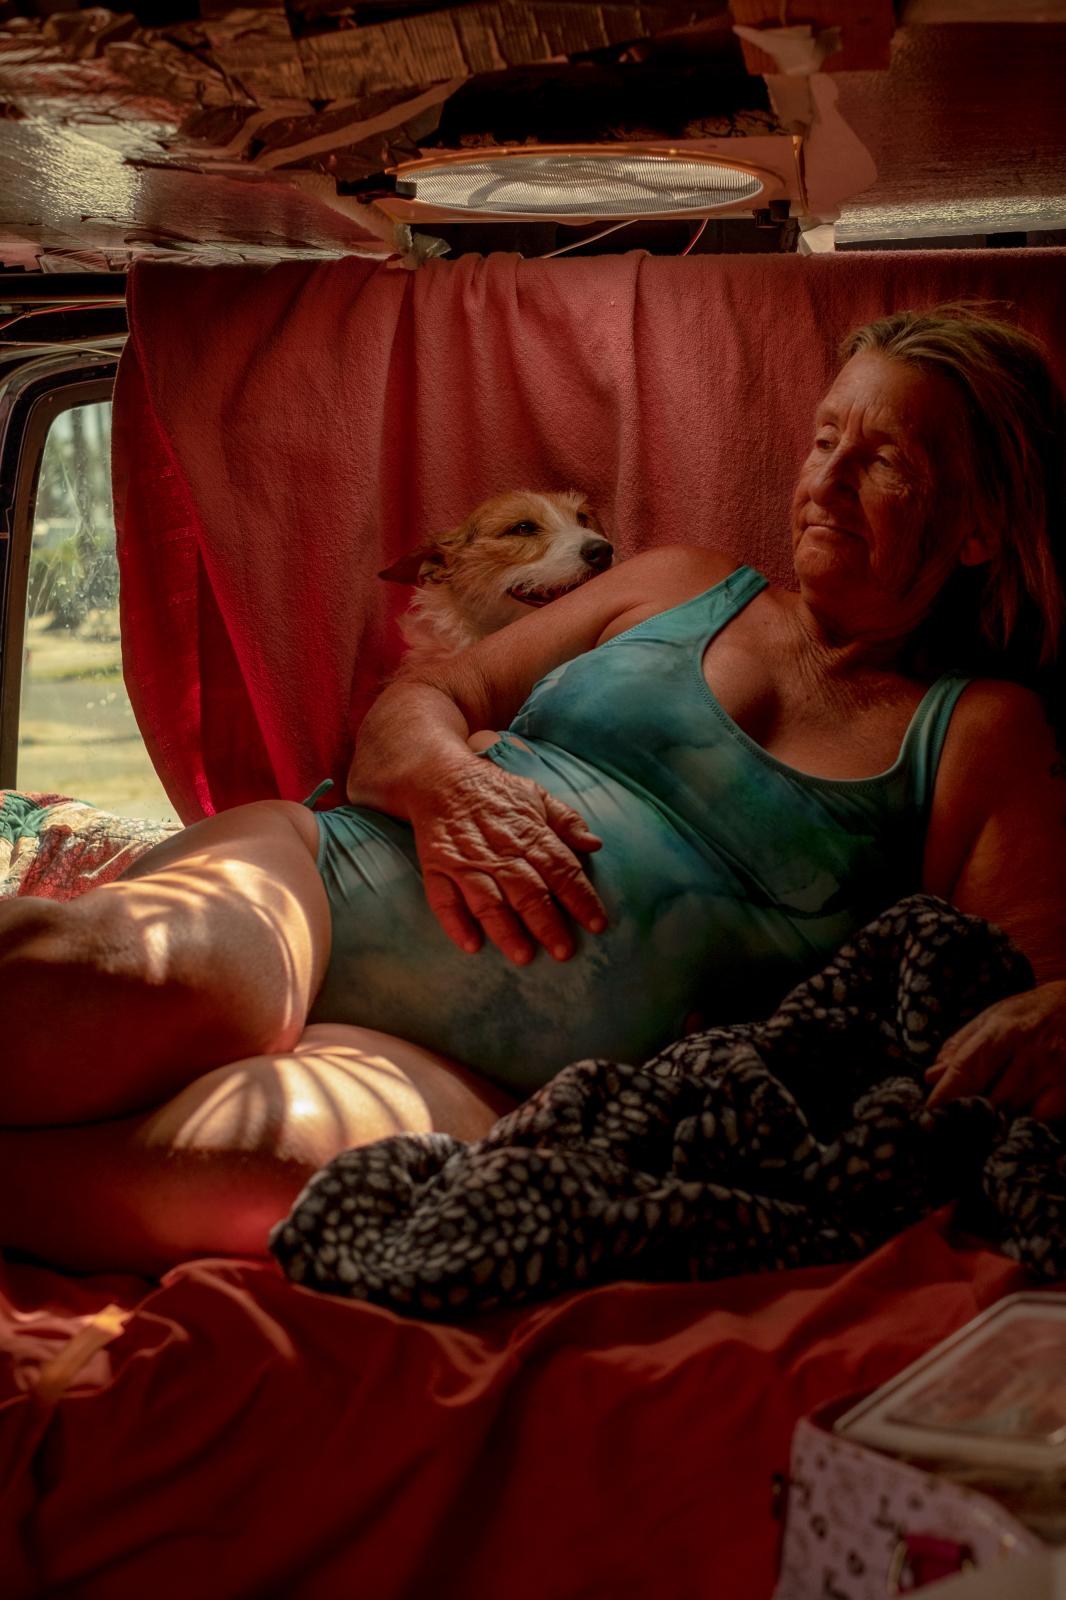 A Warm Winter (An Ongoing Journey) - Carrie and Susy inside their van in Palm Desert, CA